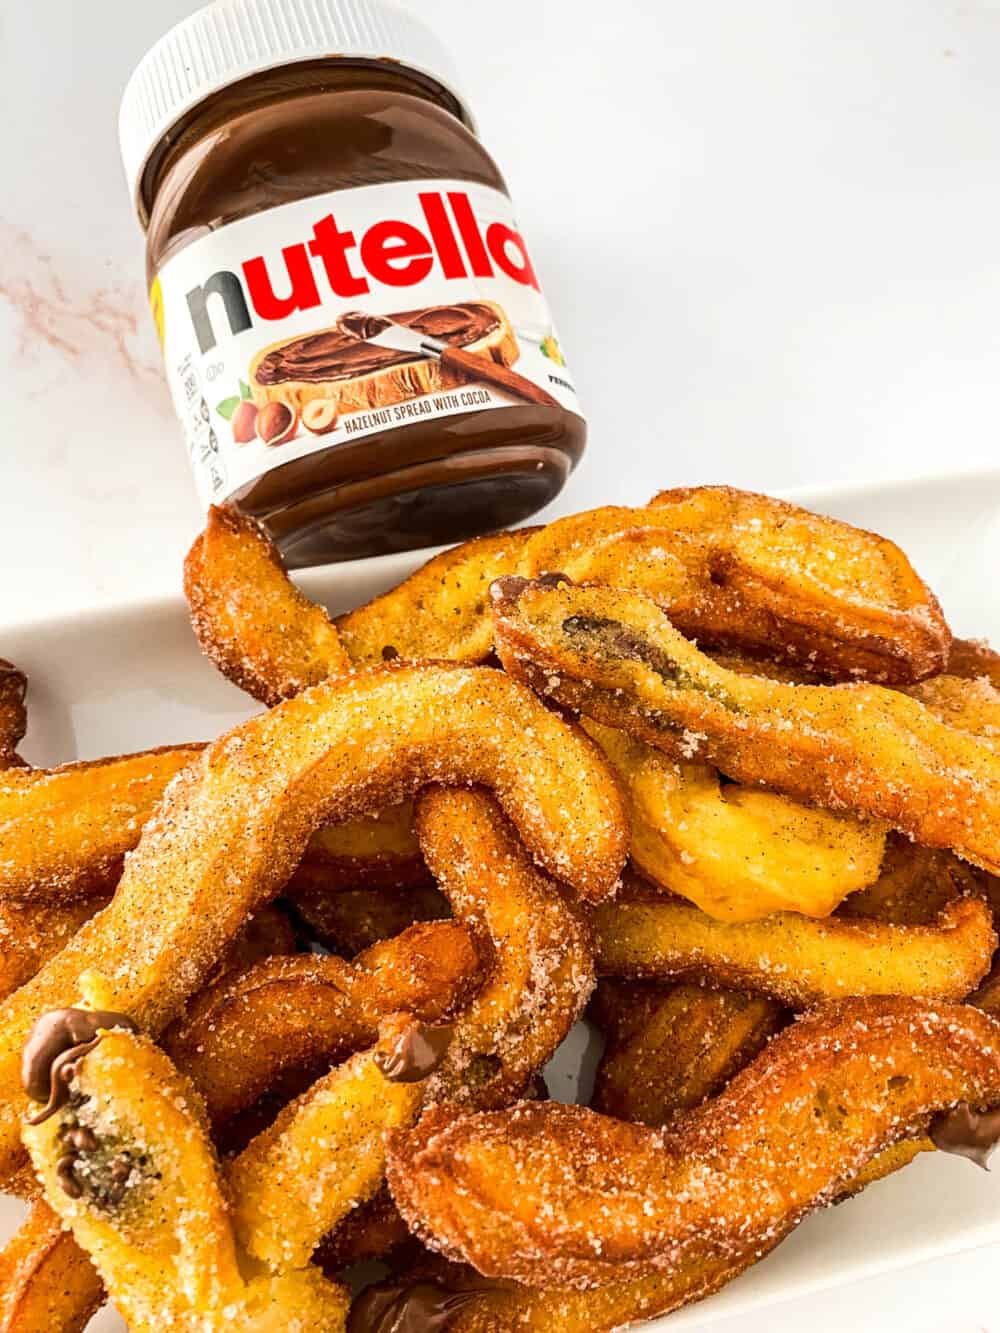 Churros and Nutella: a combination that will satisfy ANY sweet tooth! The best part to my Nutella Churros is that they’re STUFFED with melted Nutella and absolutely delicious!